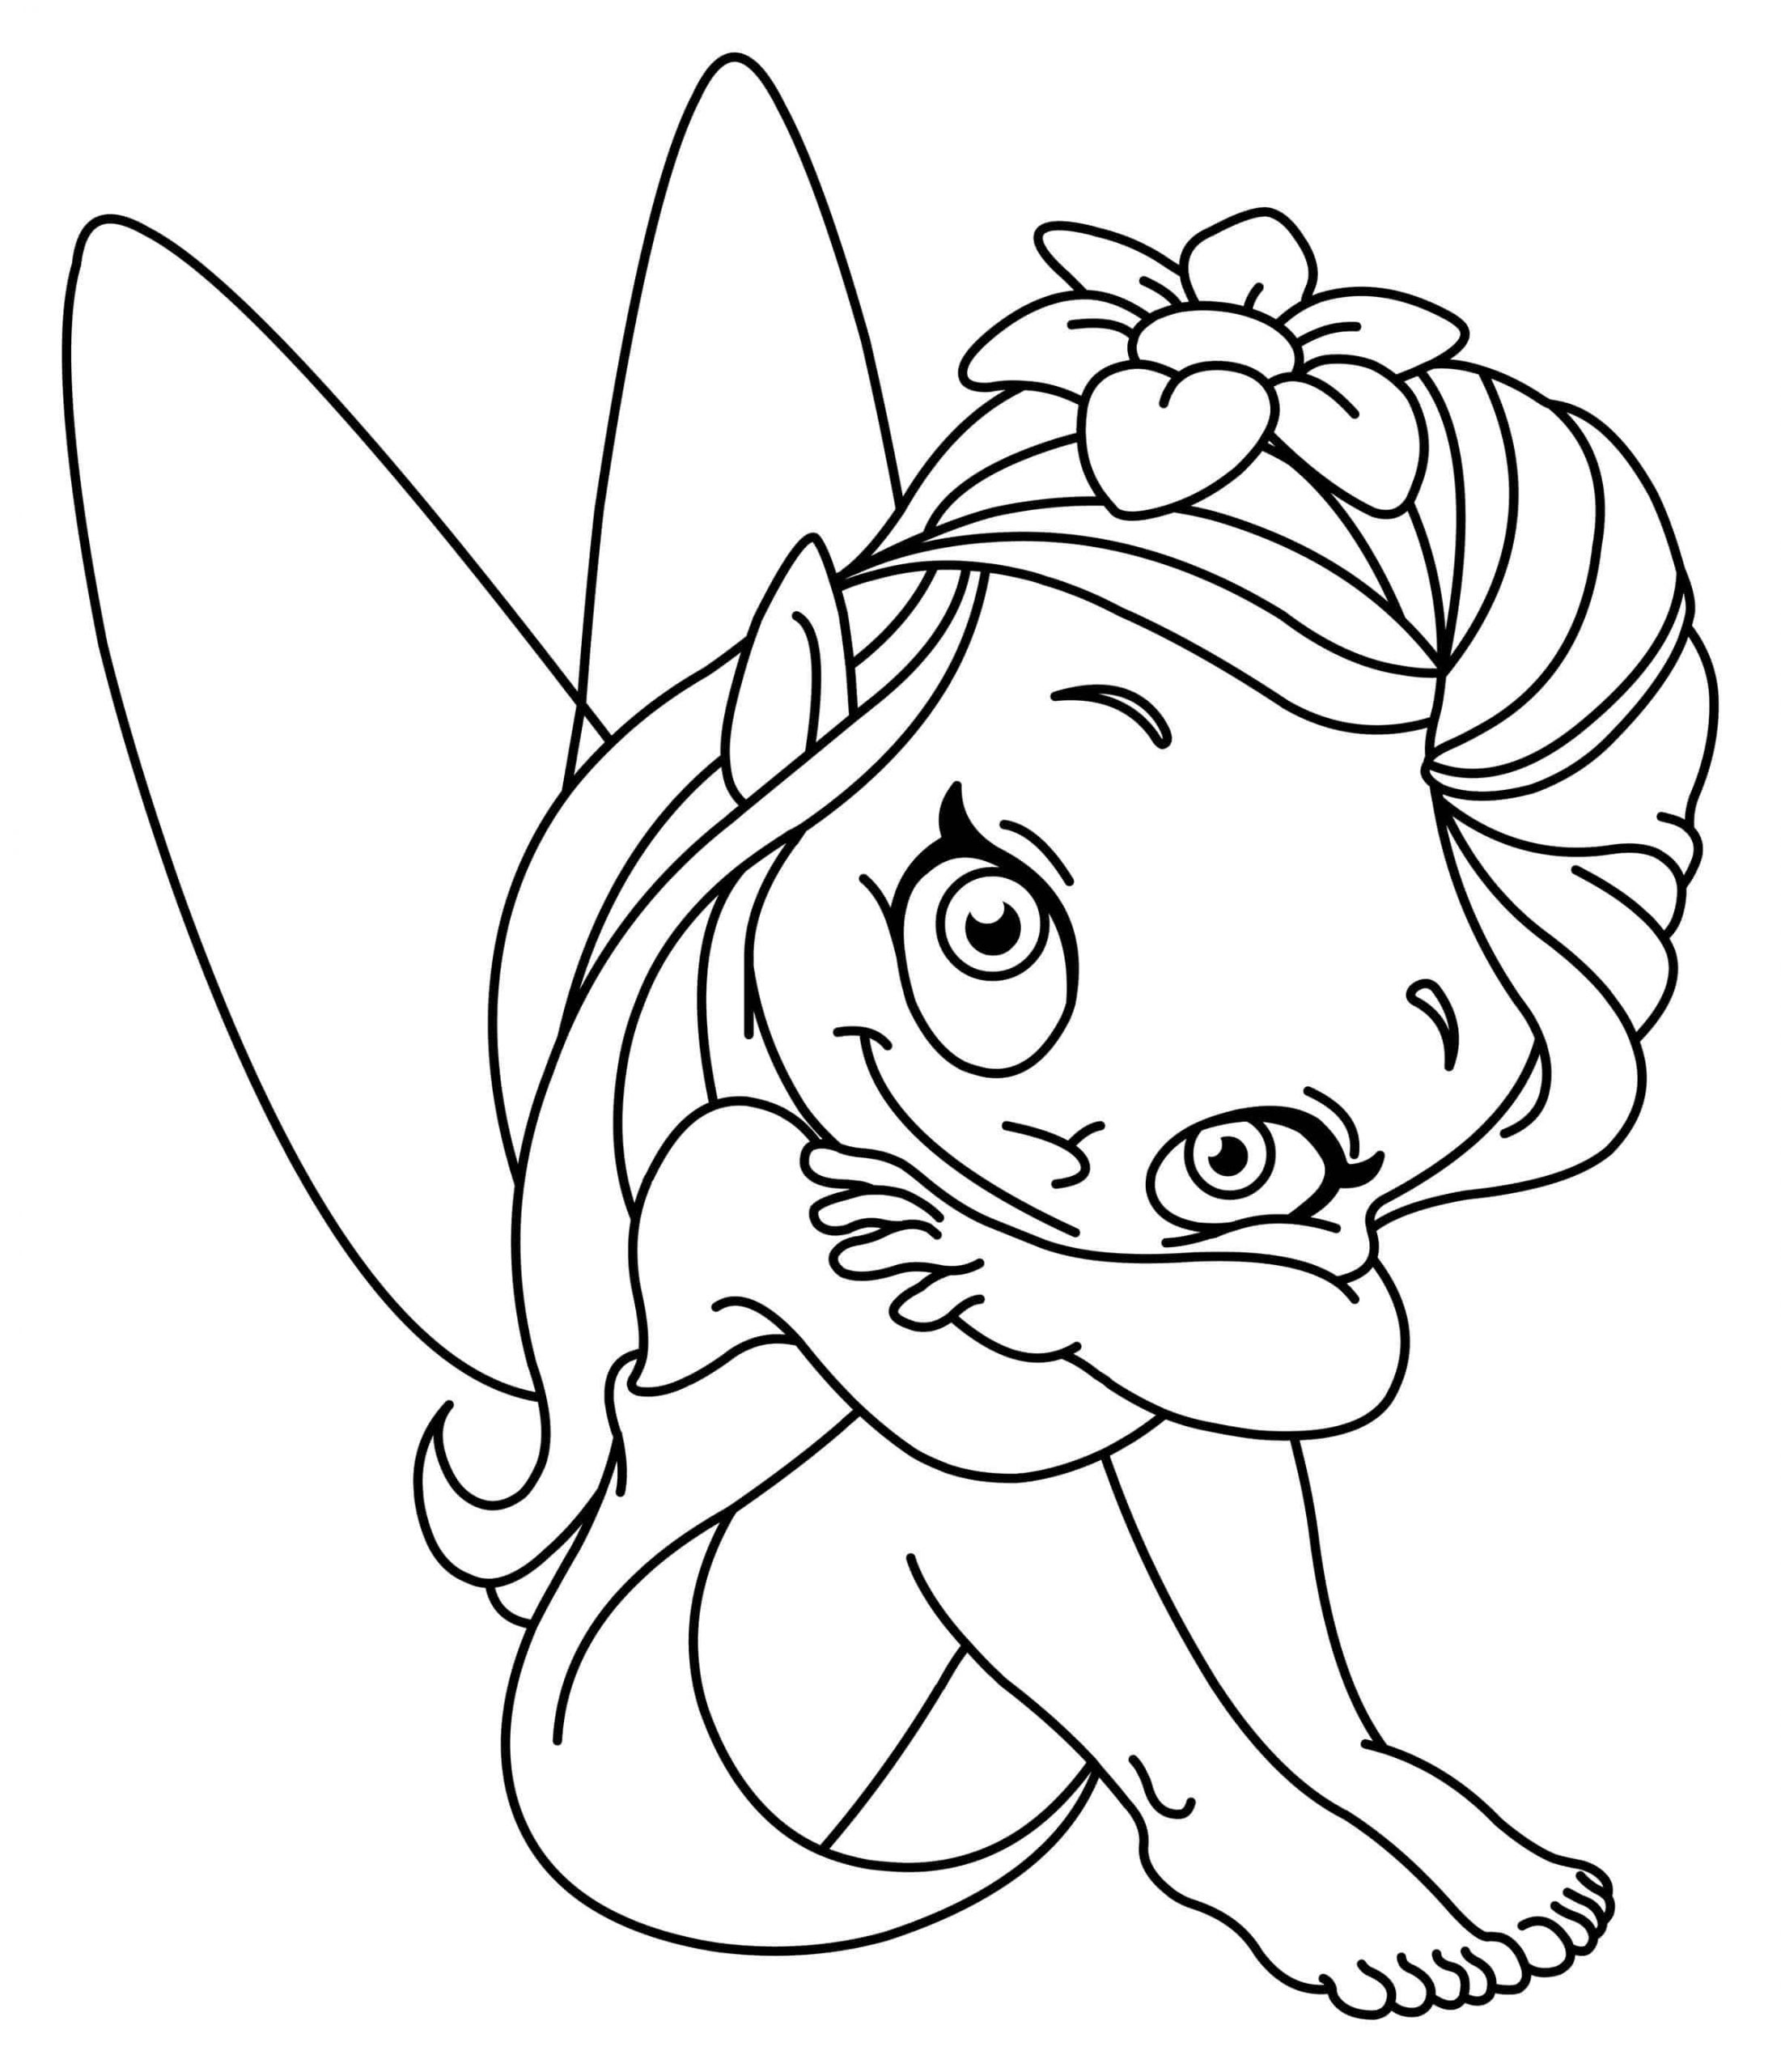 Free Coloring Books For Girls
 The Best Free Coloring Pages For Girls